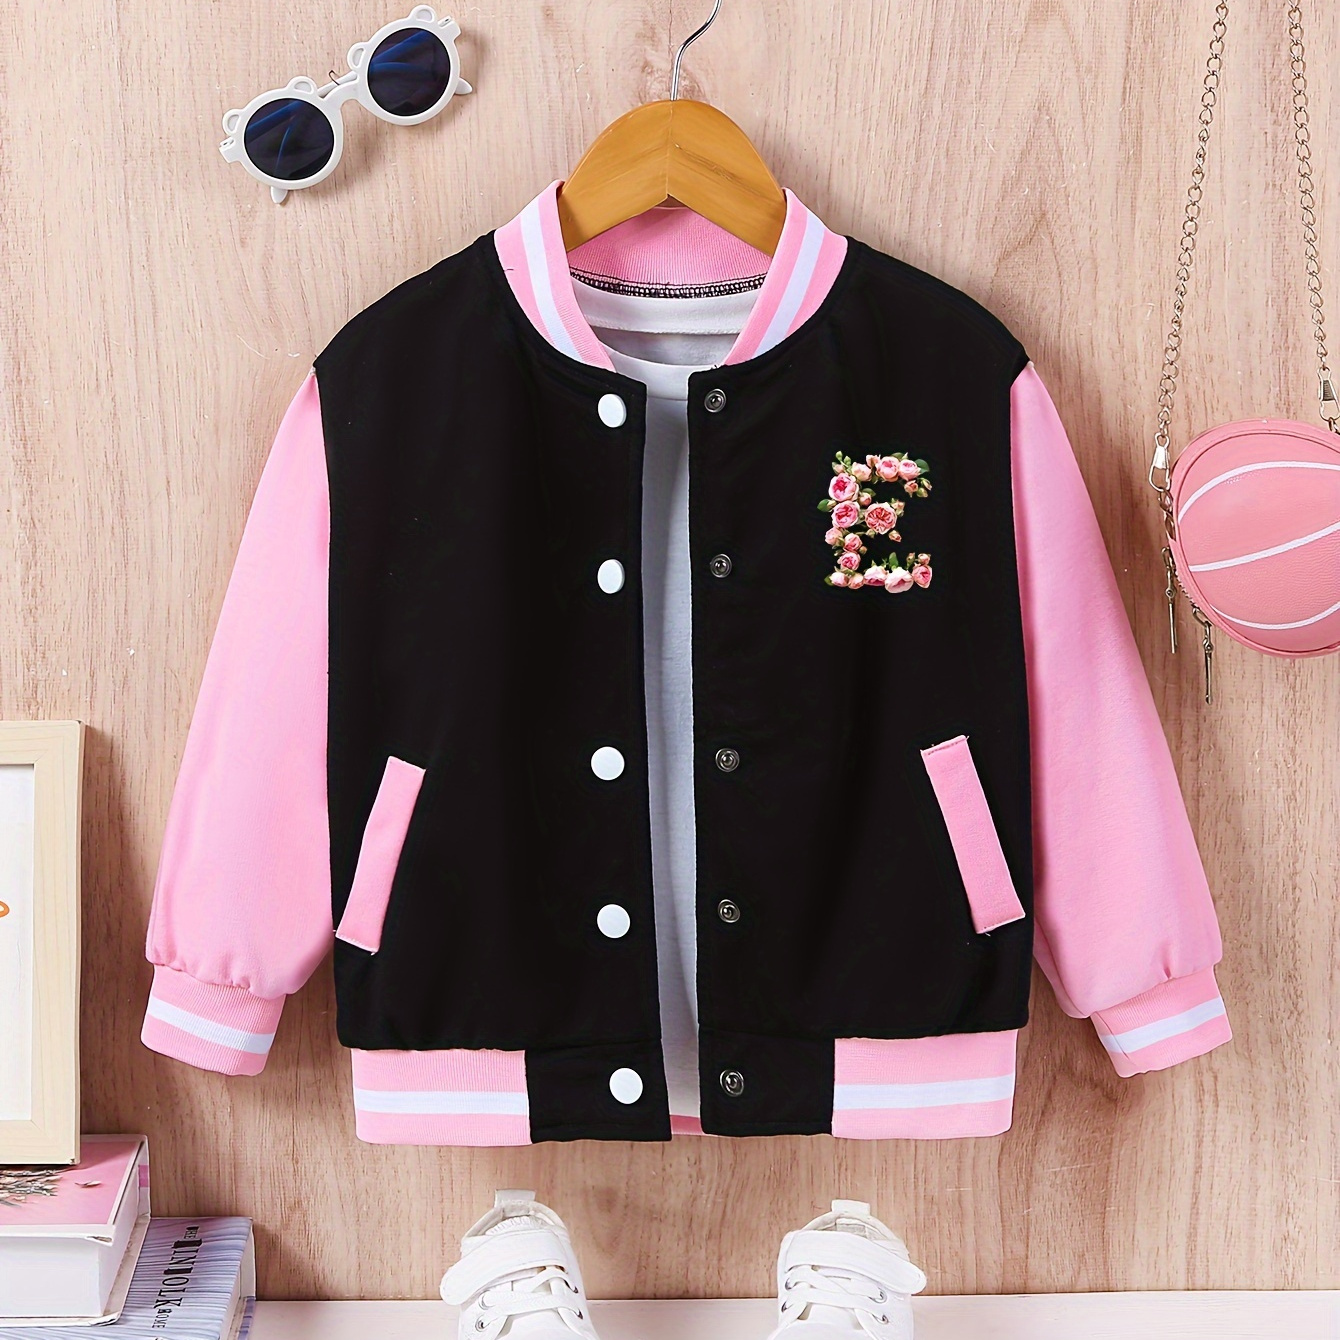 

Girls' Fashion Bomber Jacket With Floral Letter E Detail, Casual Varsity Style, Spring/autumn Outerwear